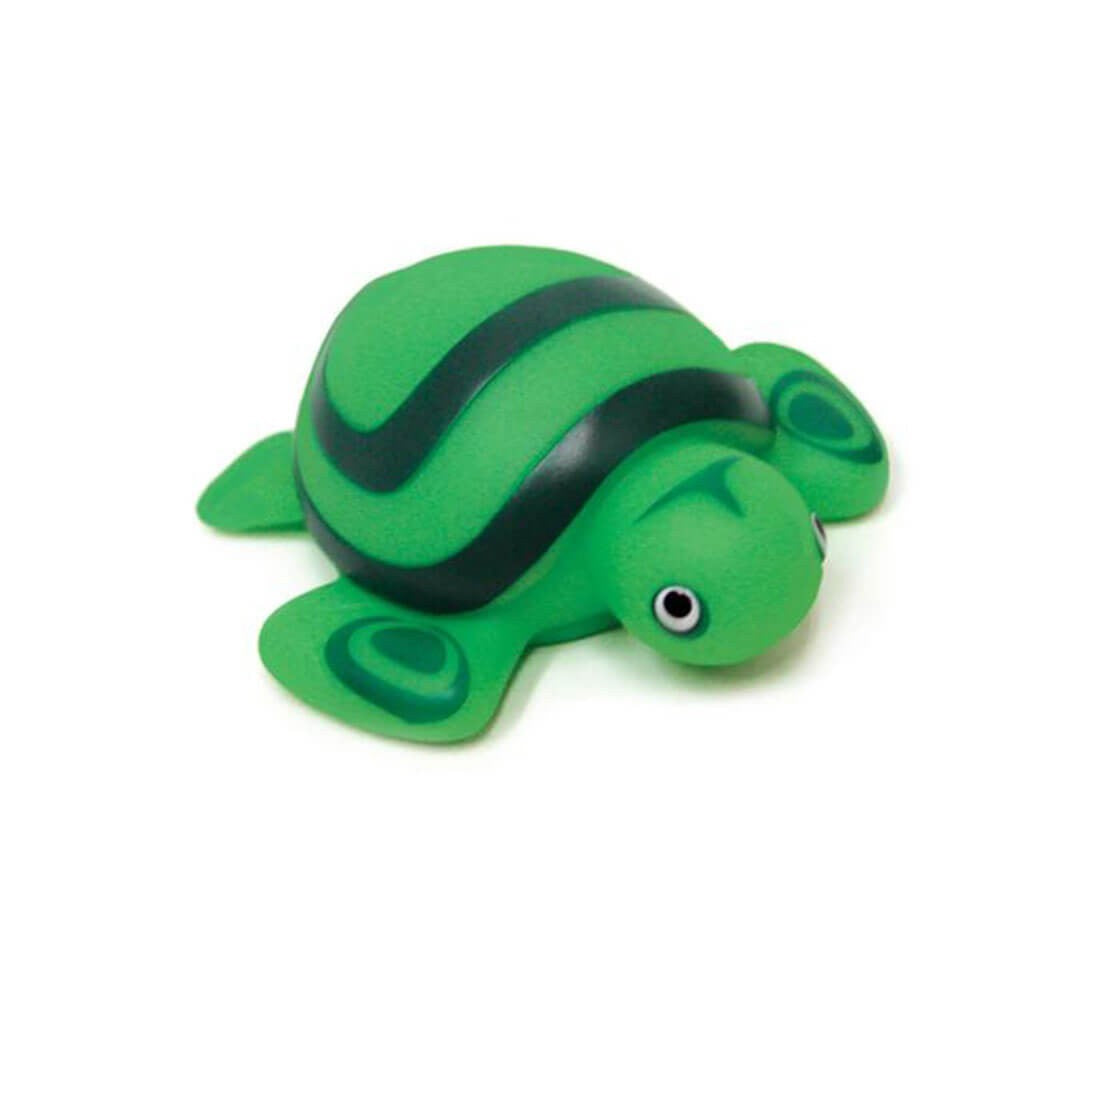 Hot Tub Squirt Toy